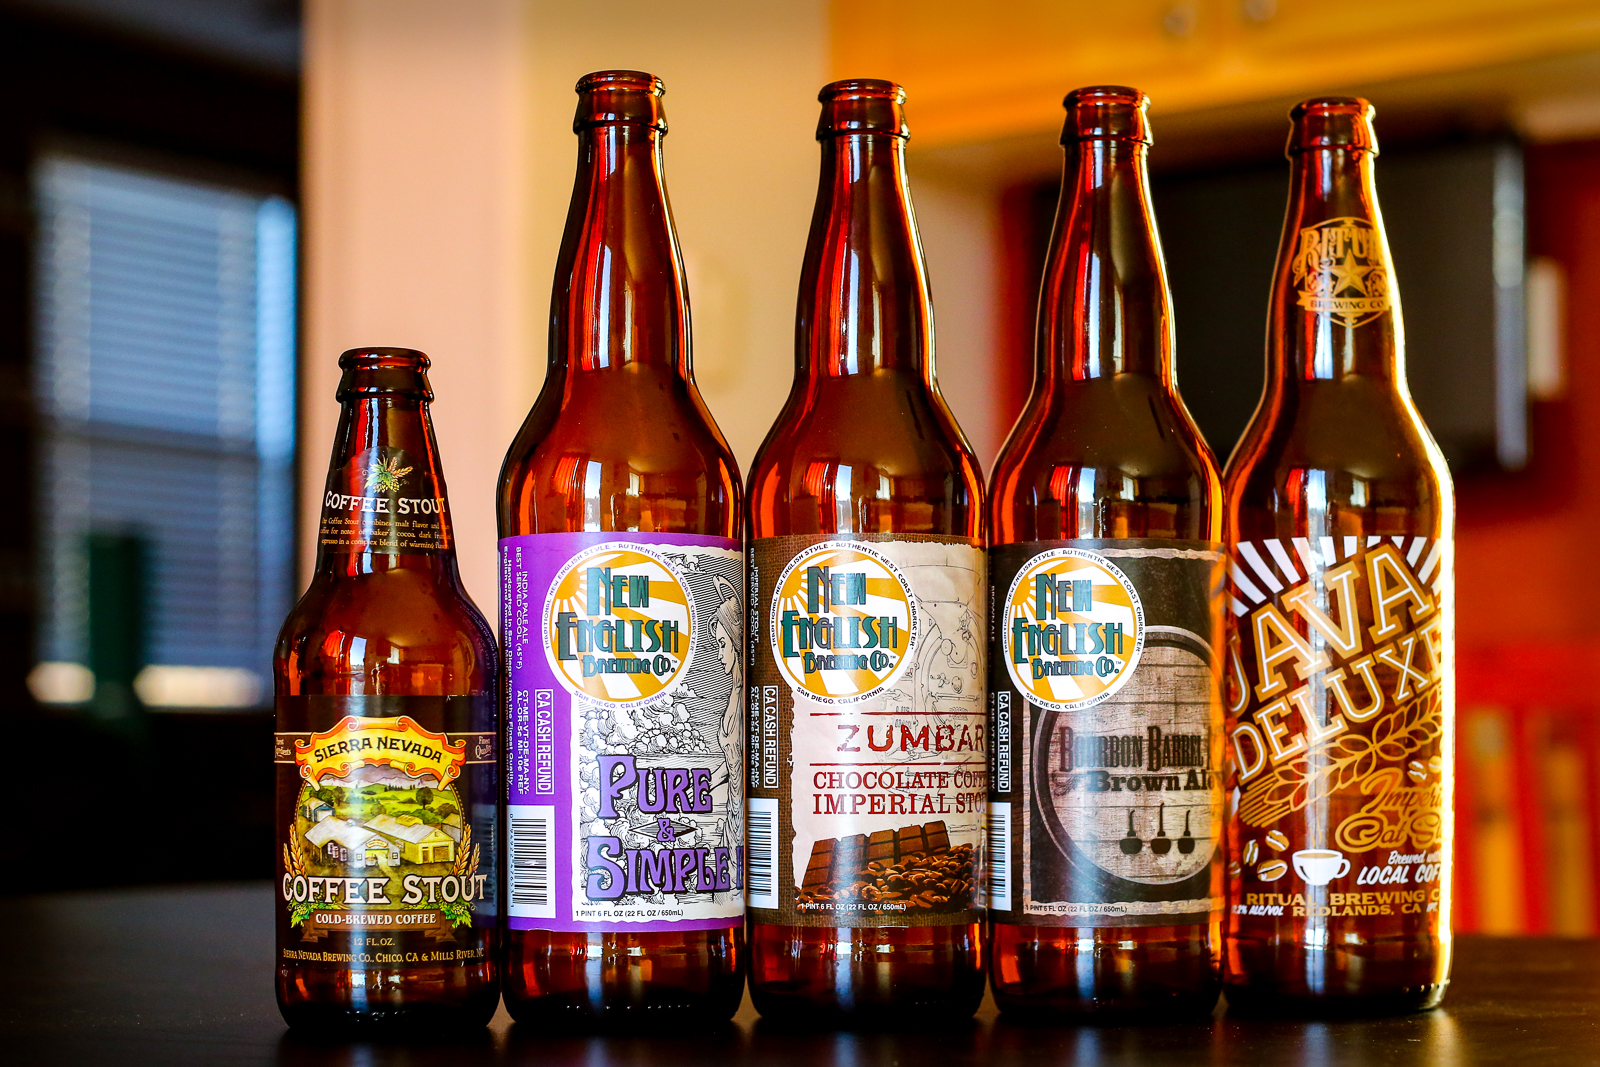 Beers from New English, Ritual Brewing, and Sierra Nevada